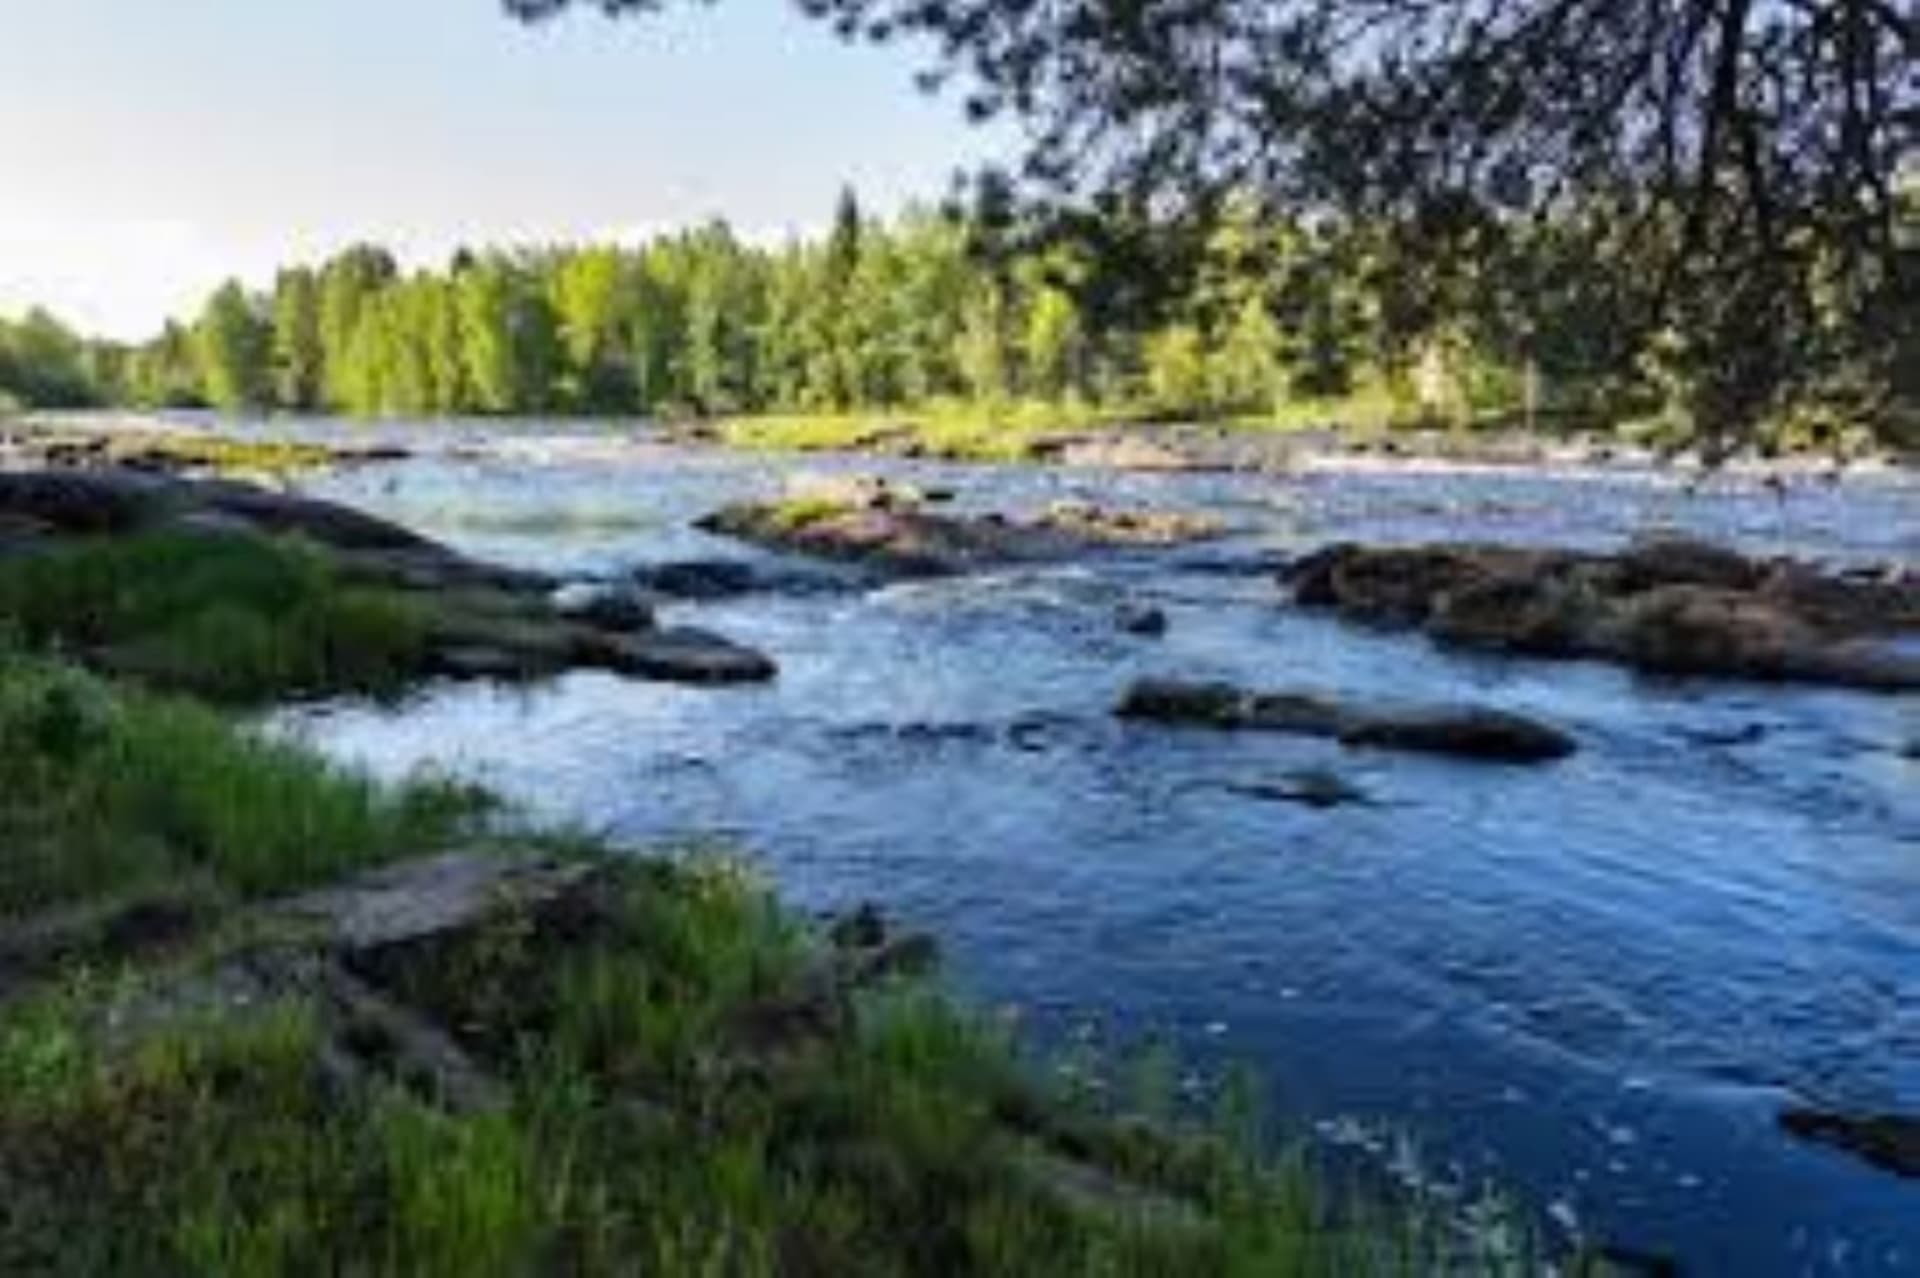 Koiteli rapids area in summer. Blue water flowing between rocks. Foreground green grass on the bank. Background green spruces.